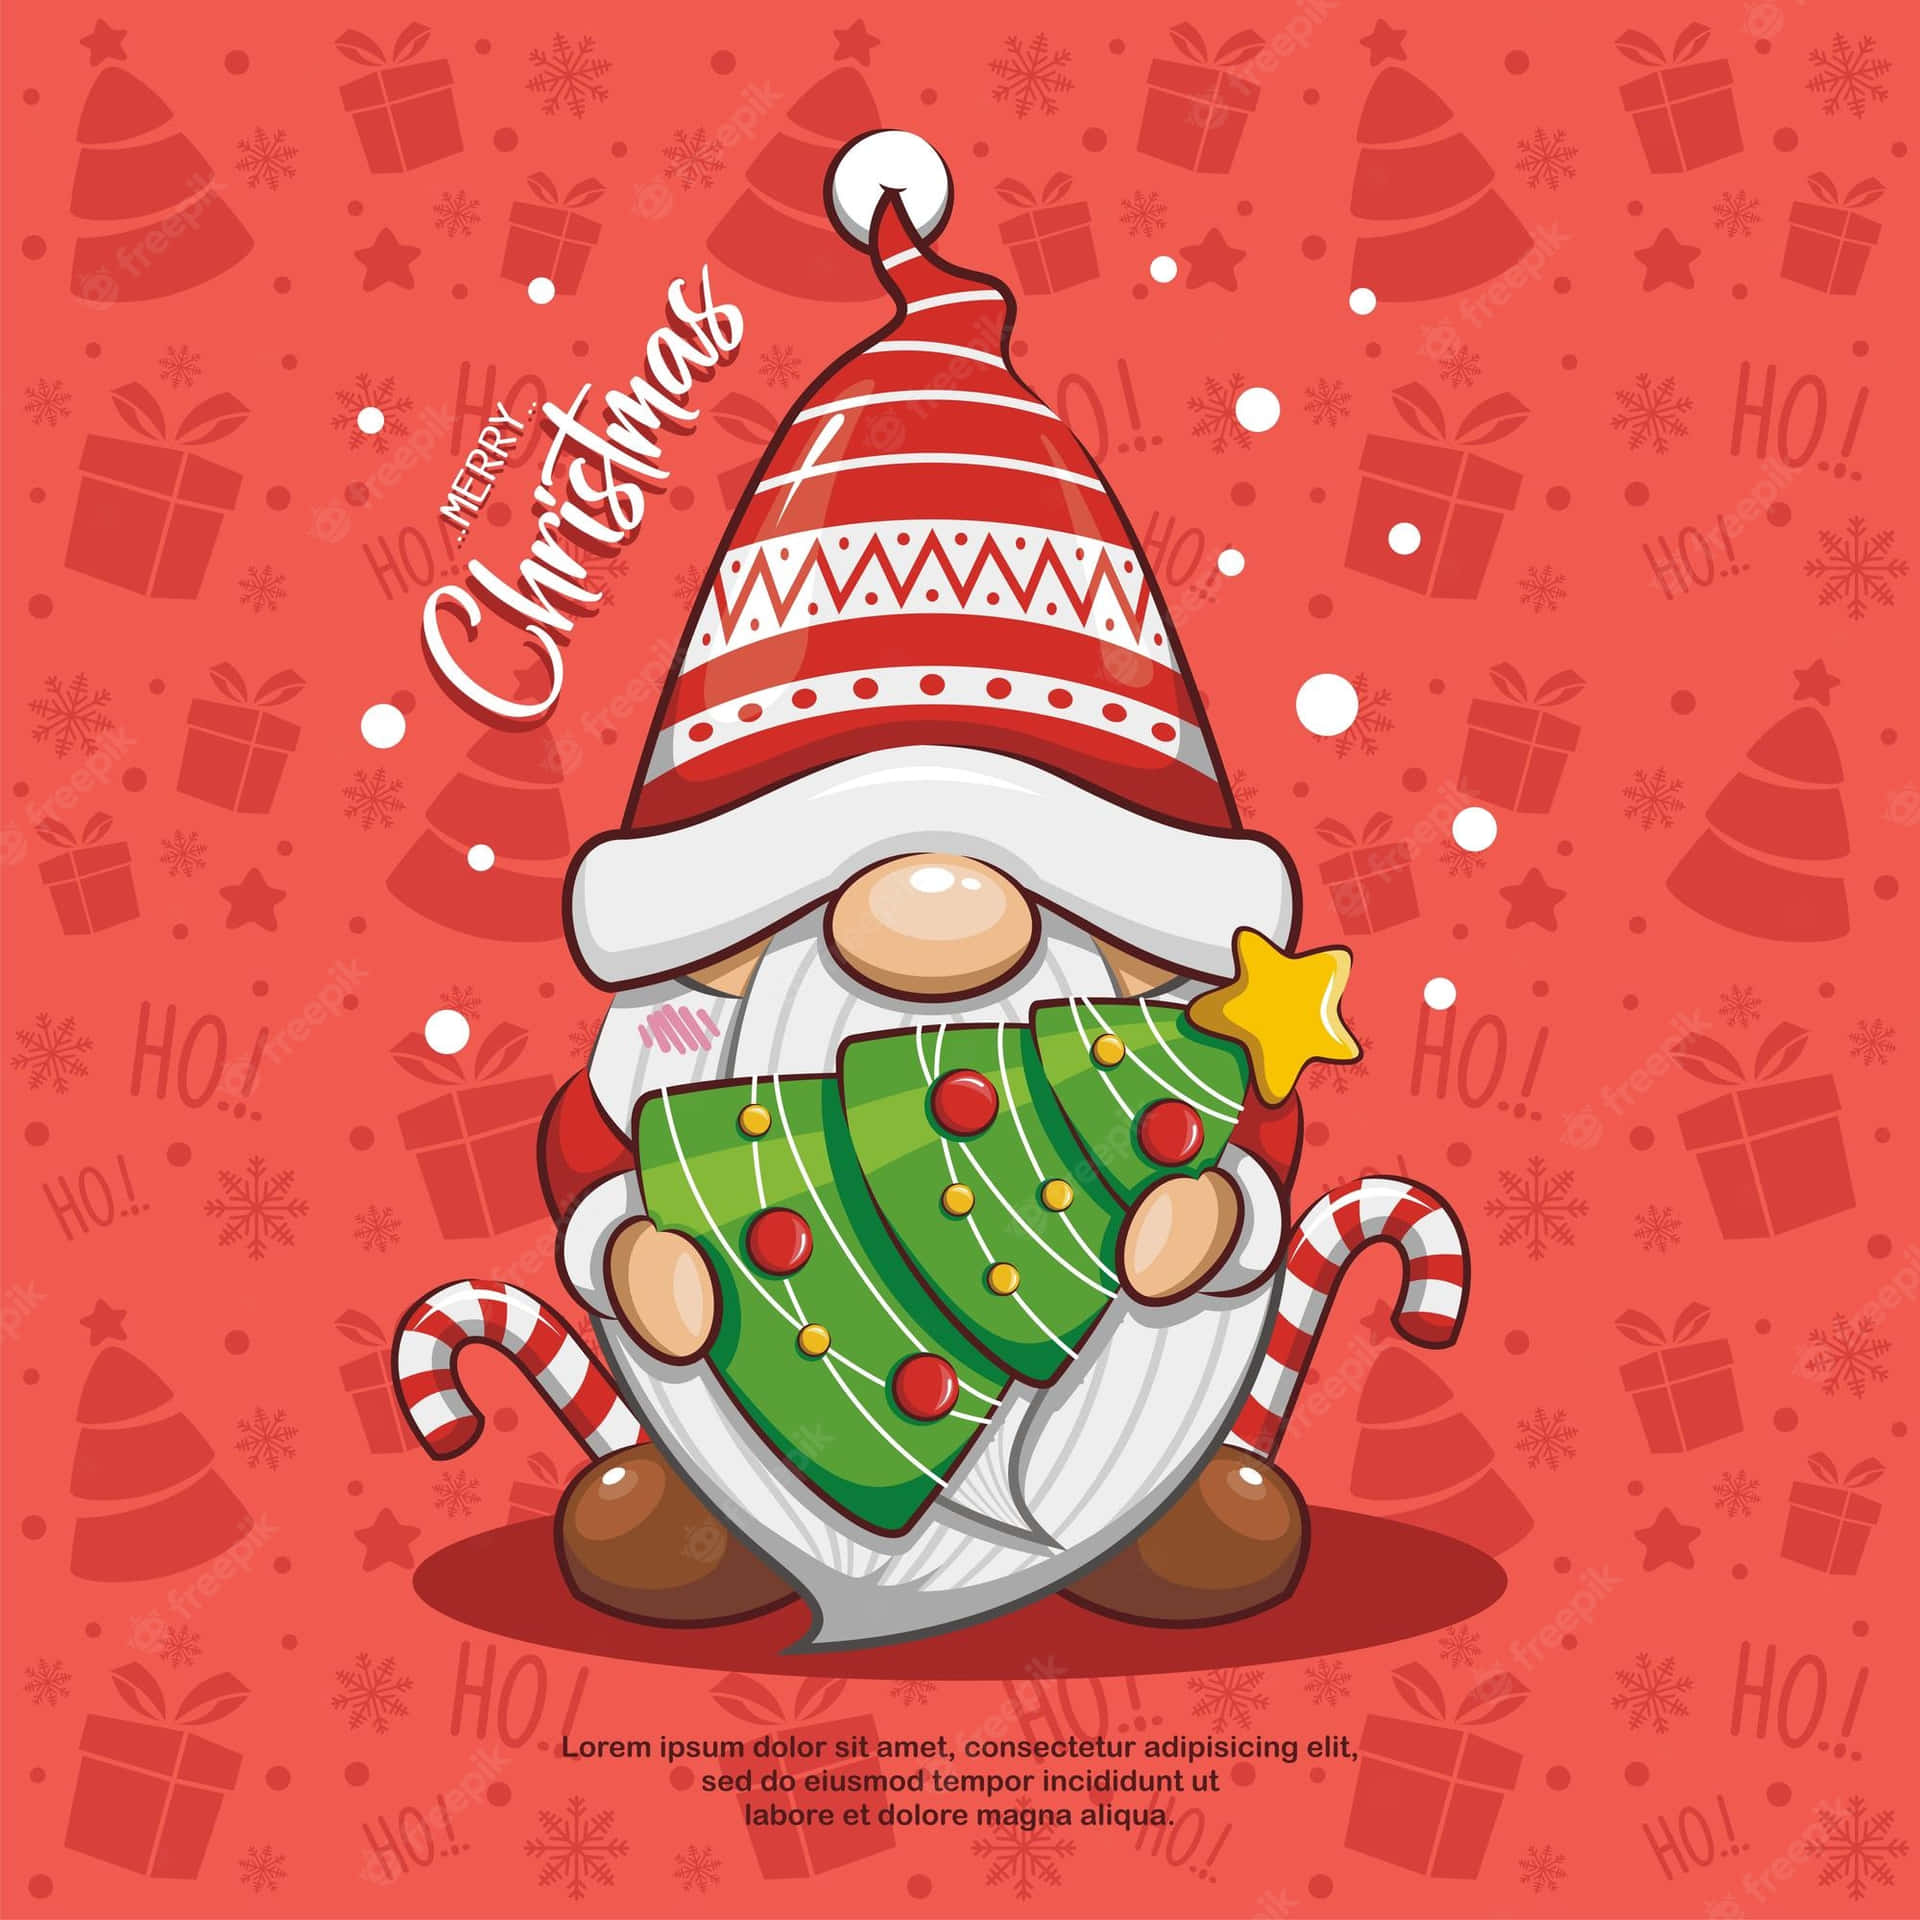 "Christmas Gnome in a Winter Wonderland". Wallpaper